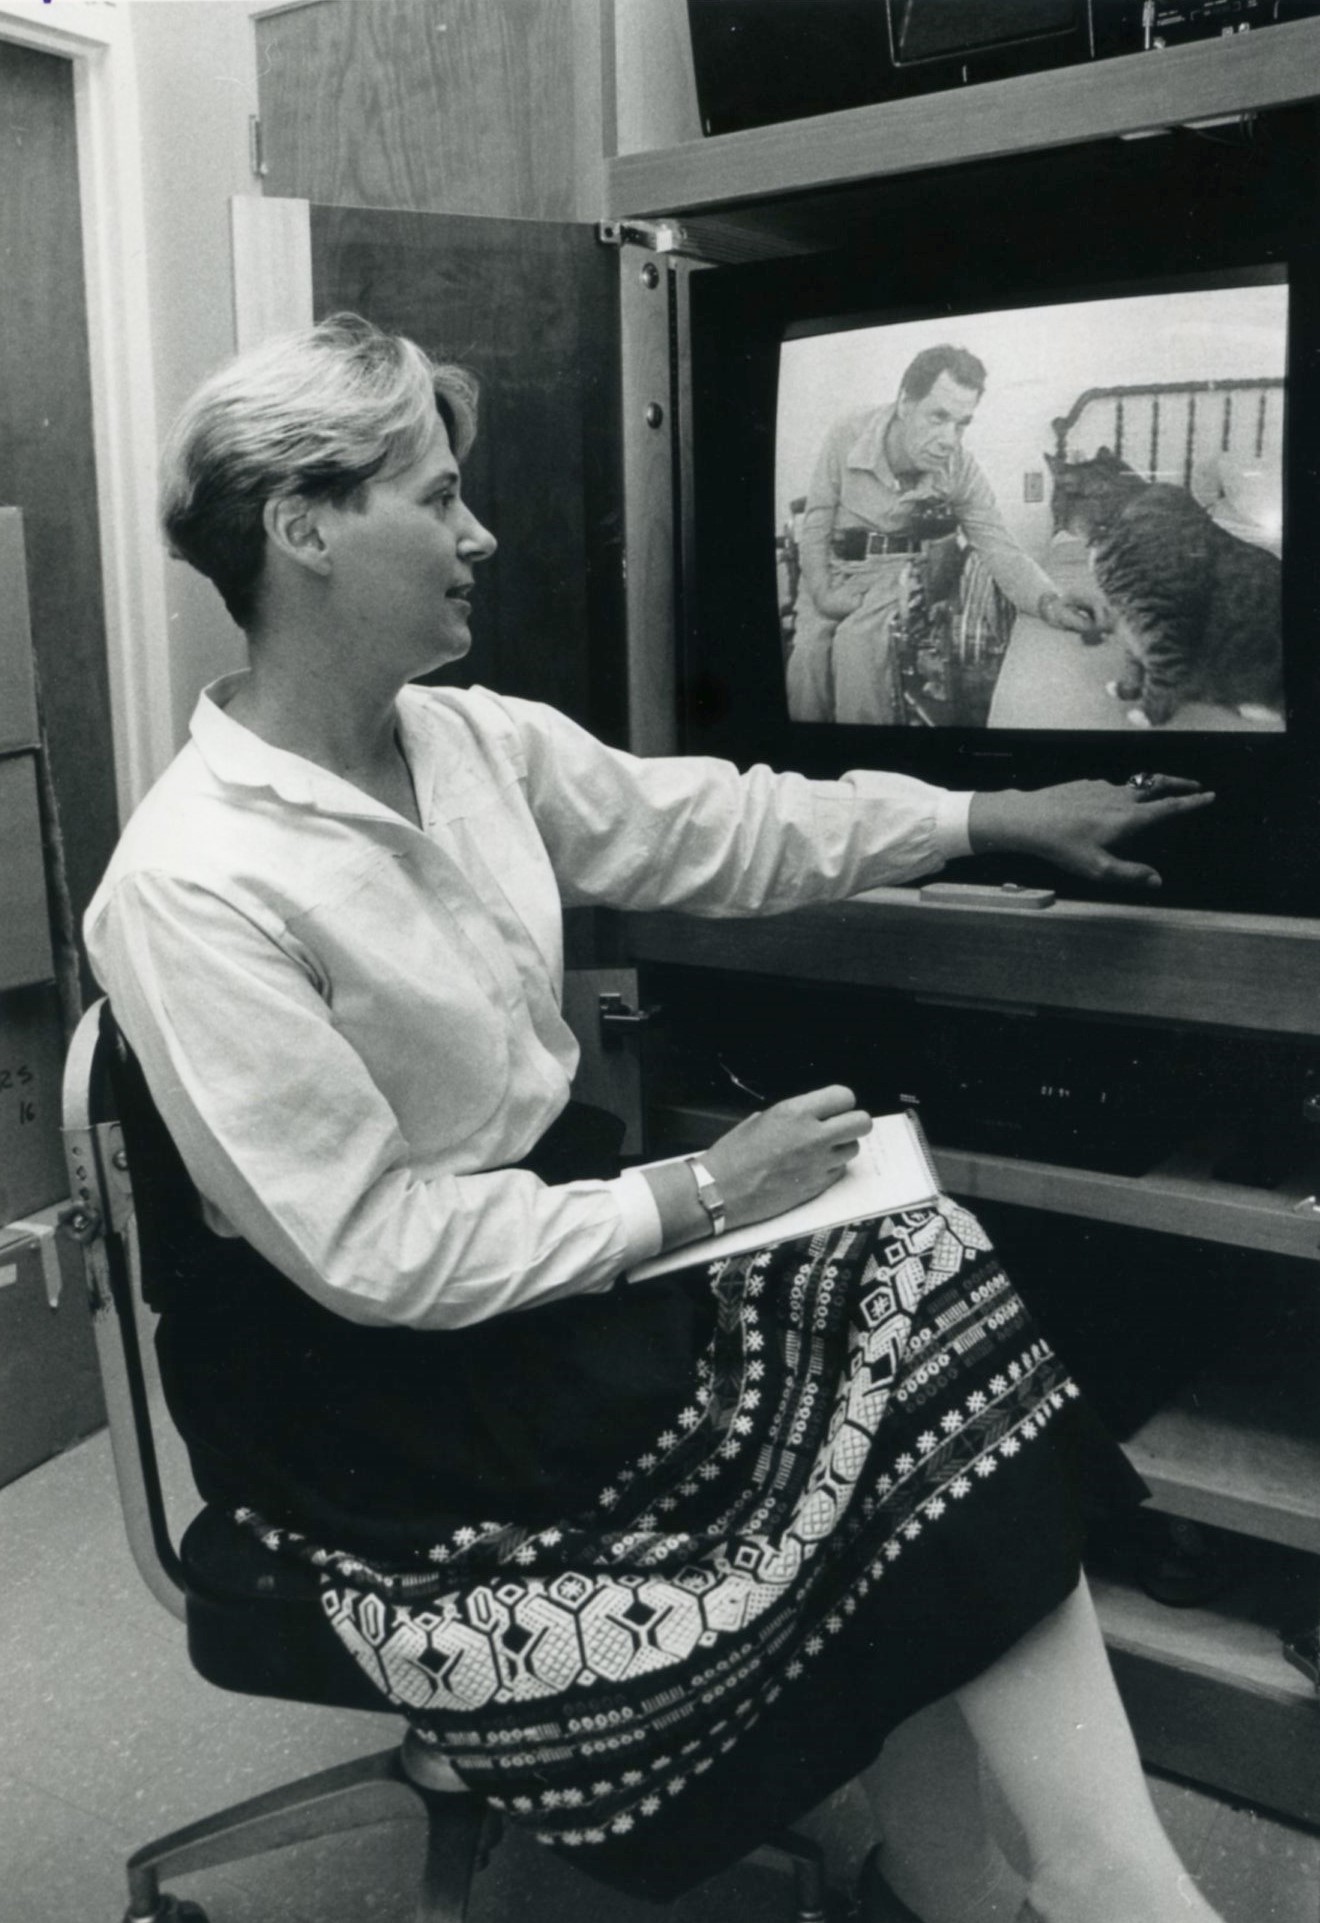 A woman wearing a long skirt and white blouse is seated in a chair before a TV. On the screen a man is petting a cat.